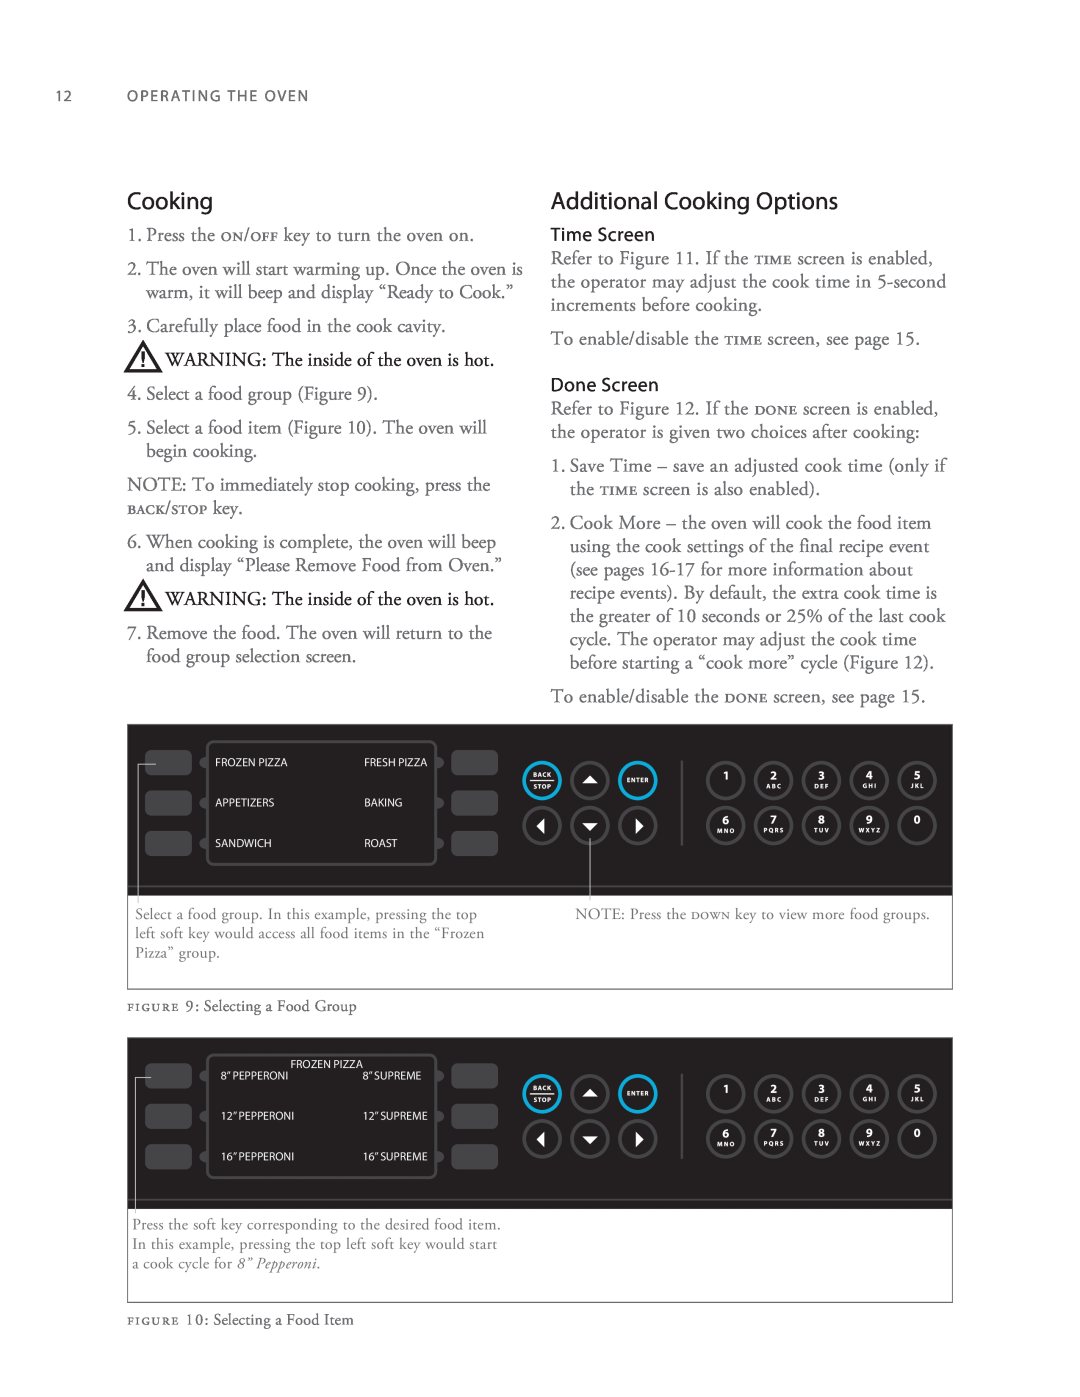 Turbo Chef Technologies 2TM manual Additional Cooking Options, WARNING The inside of the oven is hot 